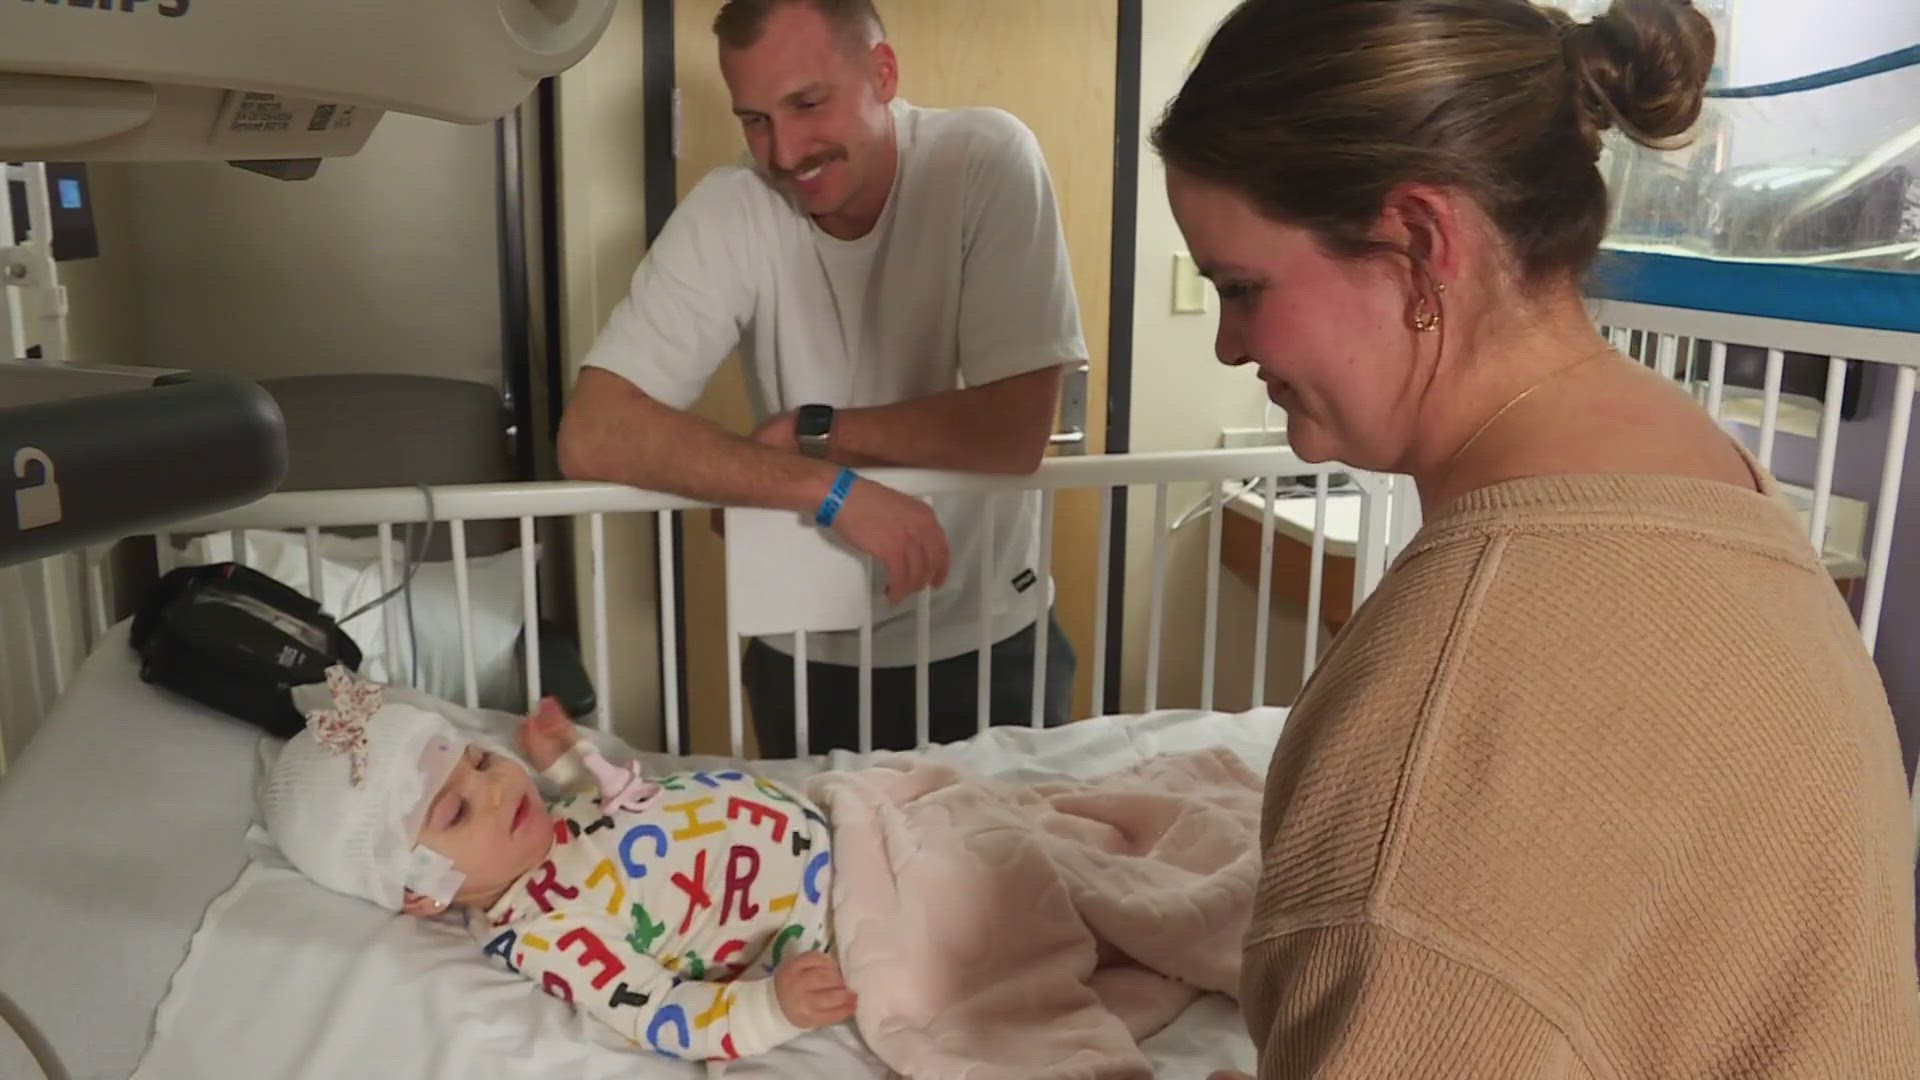 Bryce Carden's daughter, Oaklynn, is the first patient at Norton's new epilepsy unit. The unit was also partially funded by the WHAS Crusade for Children.